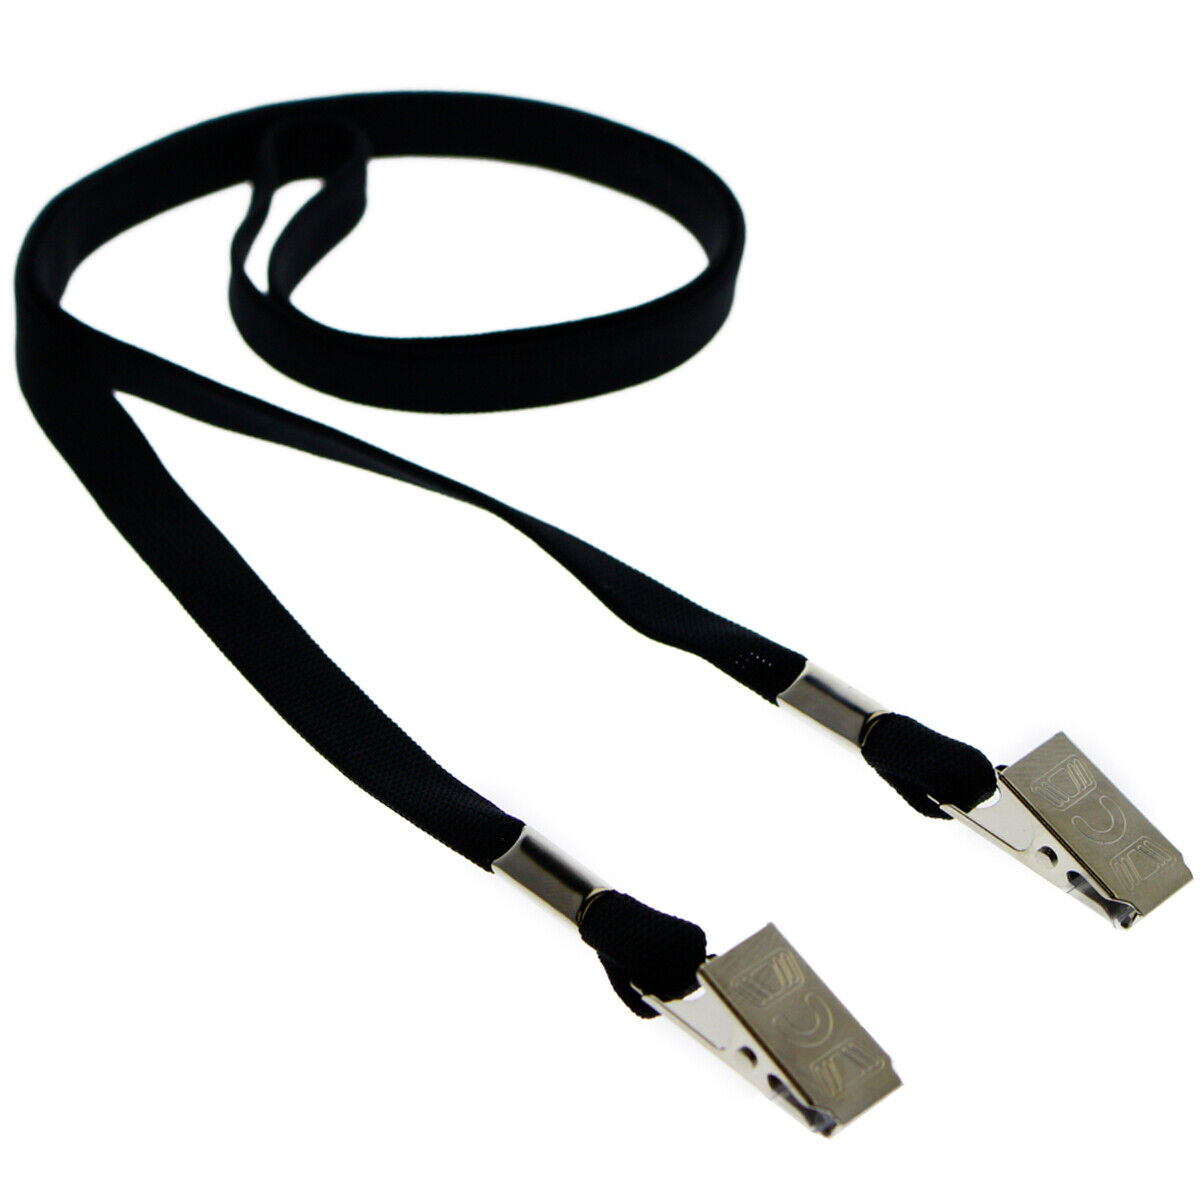 5 Pack - Face Mask Lanyards - Comfort Neck Straps with Two Bulldog Clips by SPID Specialist ID SPID-2350 - фотография #6